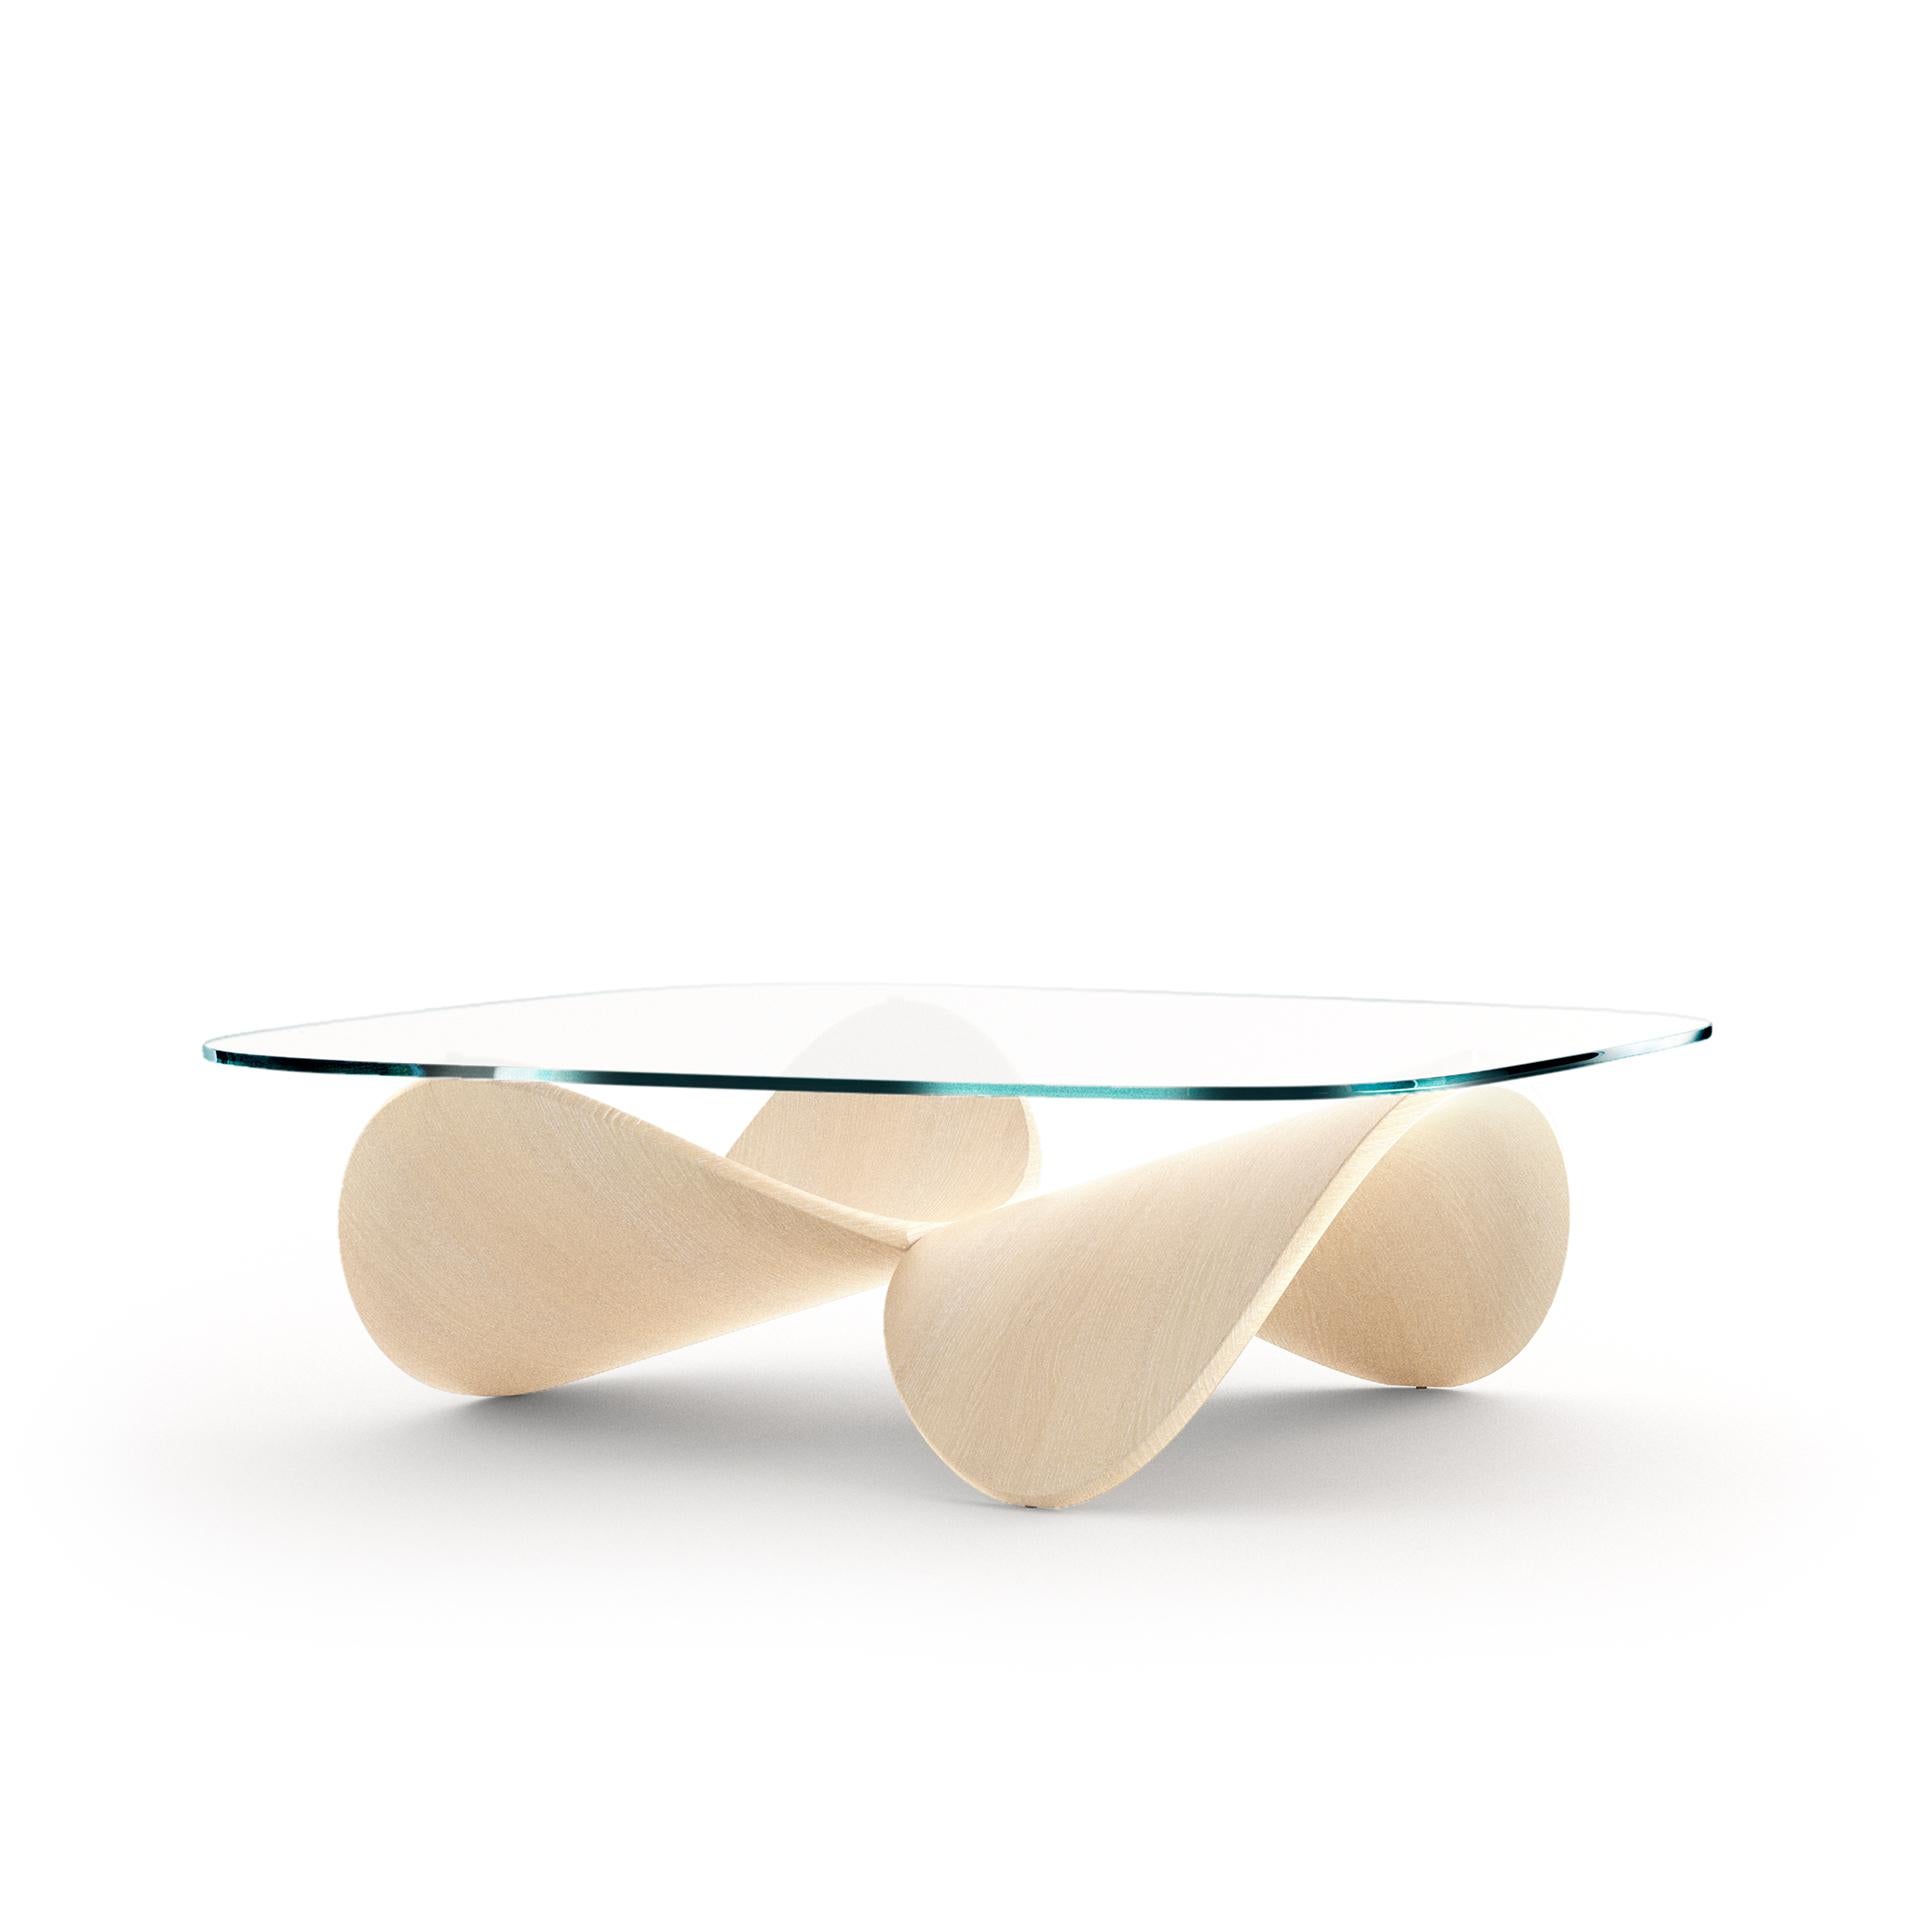 A coffee table that is both furniture and sculpture designed for authentic living spaces. Two identical wooden shells are arranged together in a reversed posture and are joined to create a sculptural structure for the glass top. 
The table was named